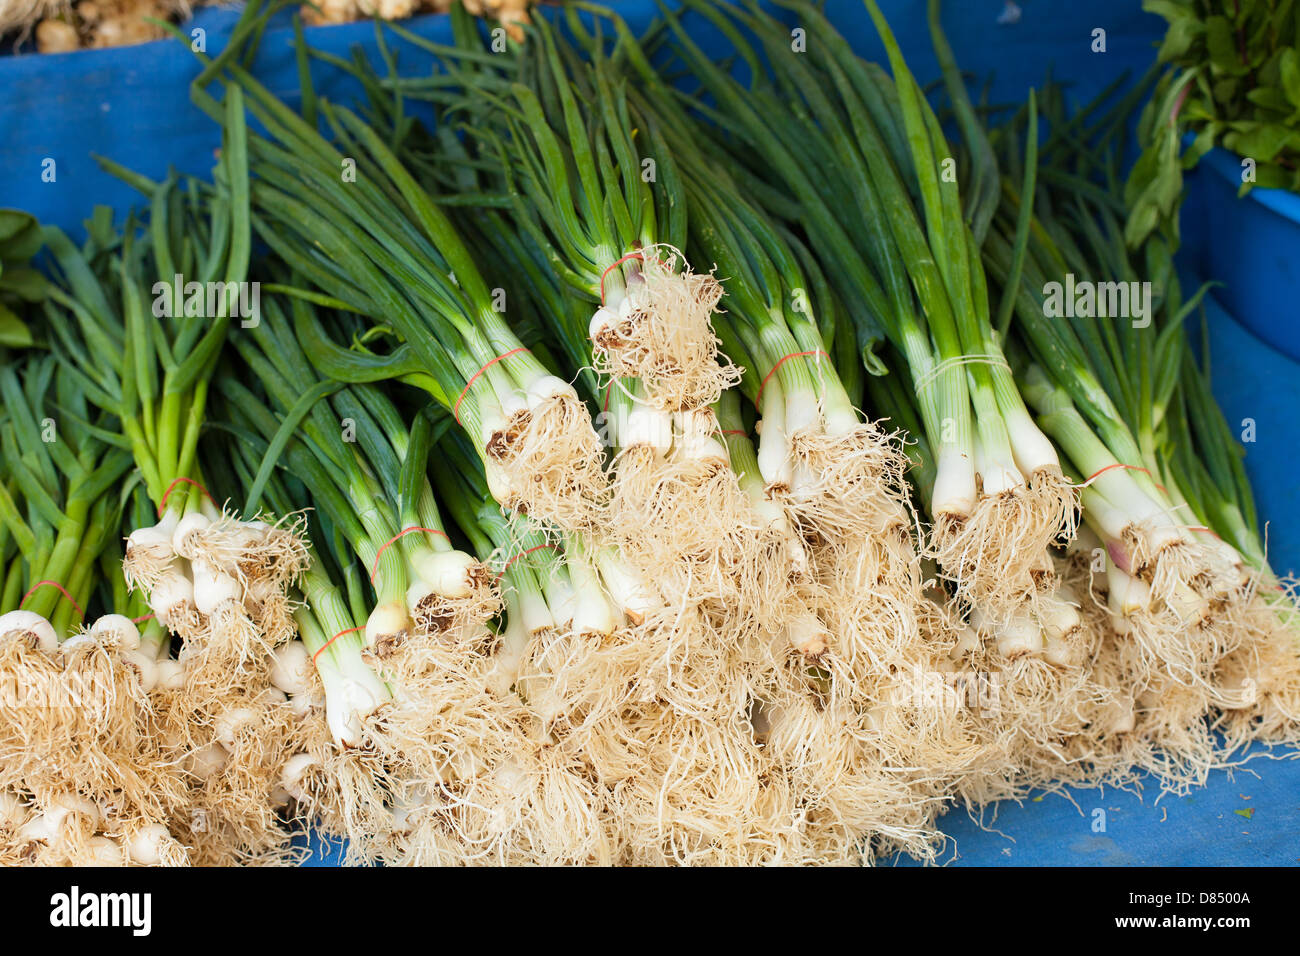 bunch of onions in the market Stock Photo